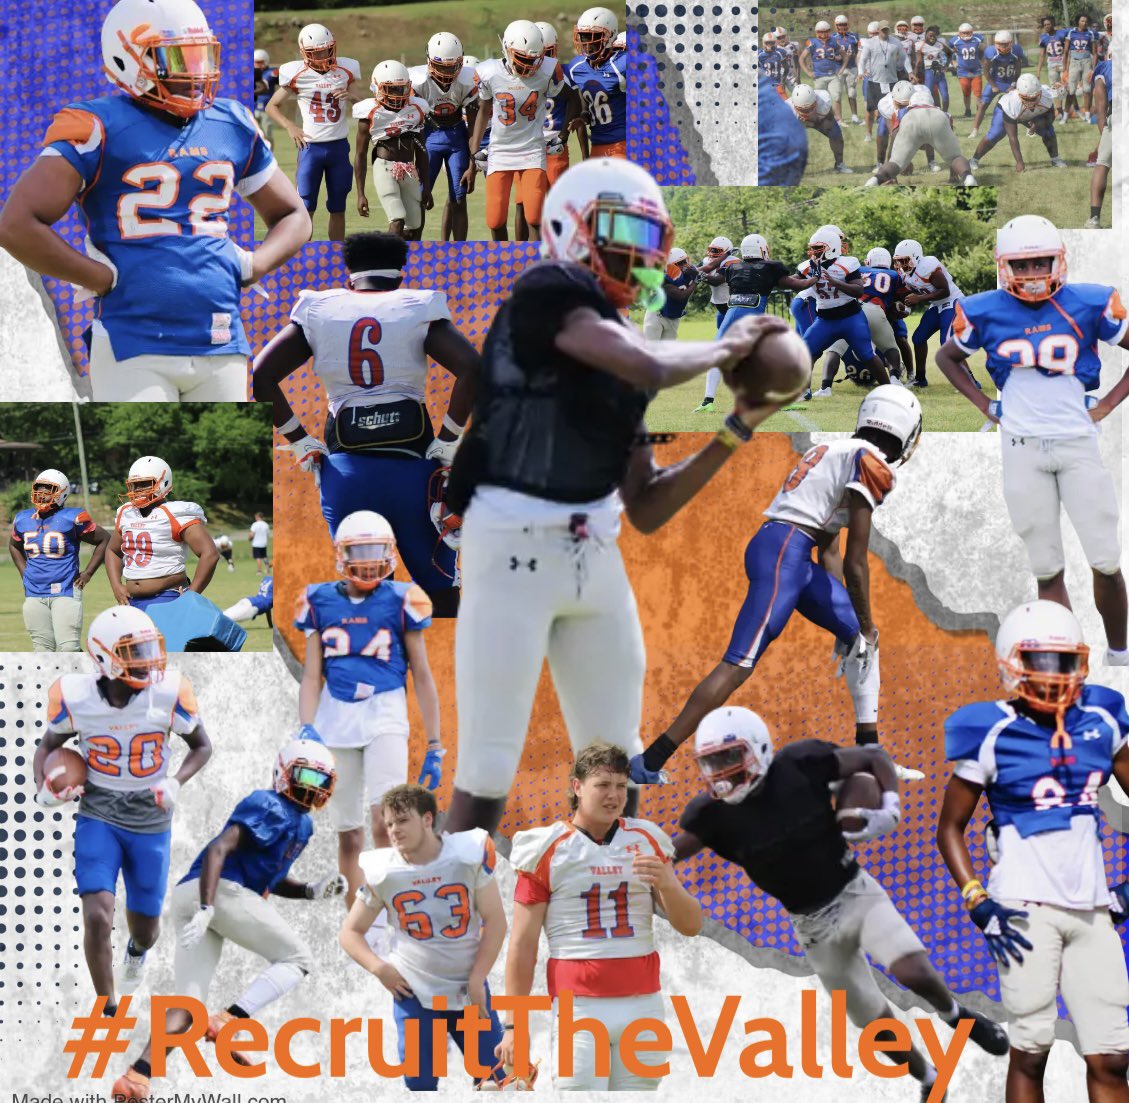 Coaches… Don’t forget to stop by THE VALLEY and check us out!!! #RecruitTheValley #BuiltRamTough